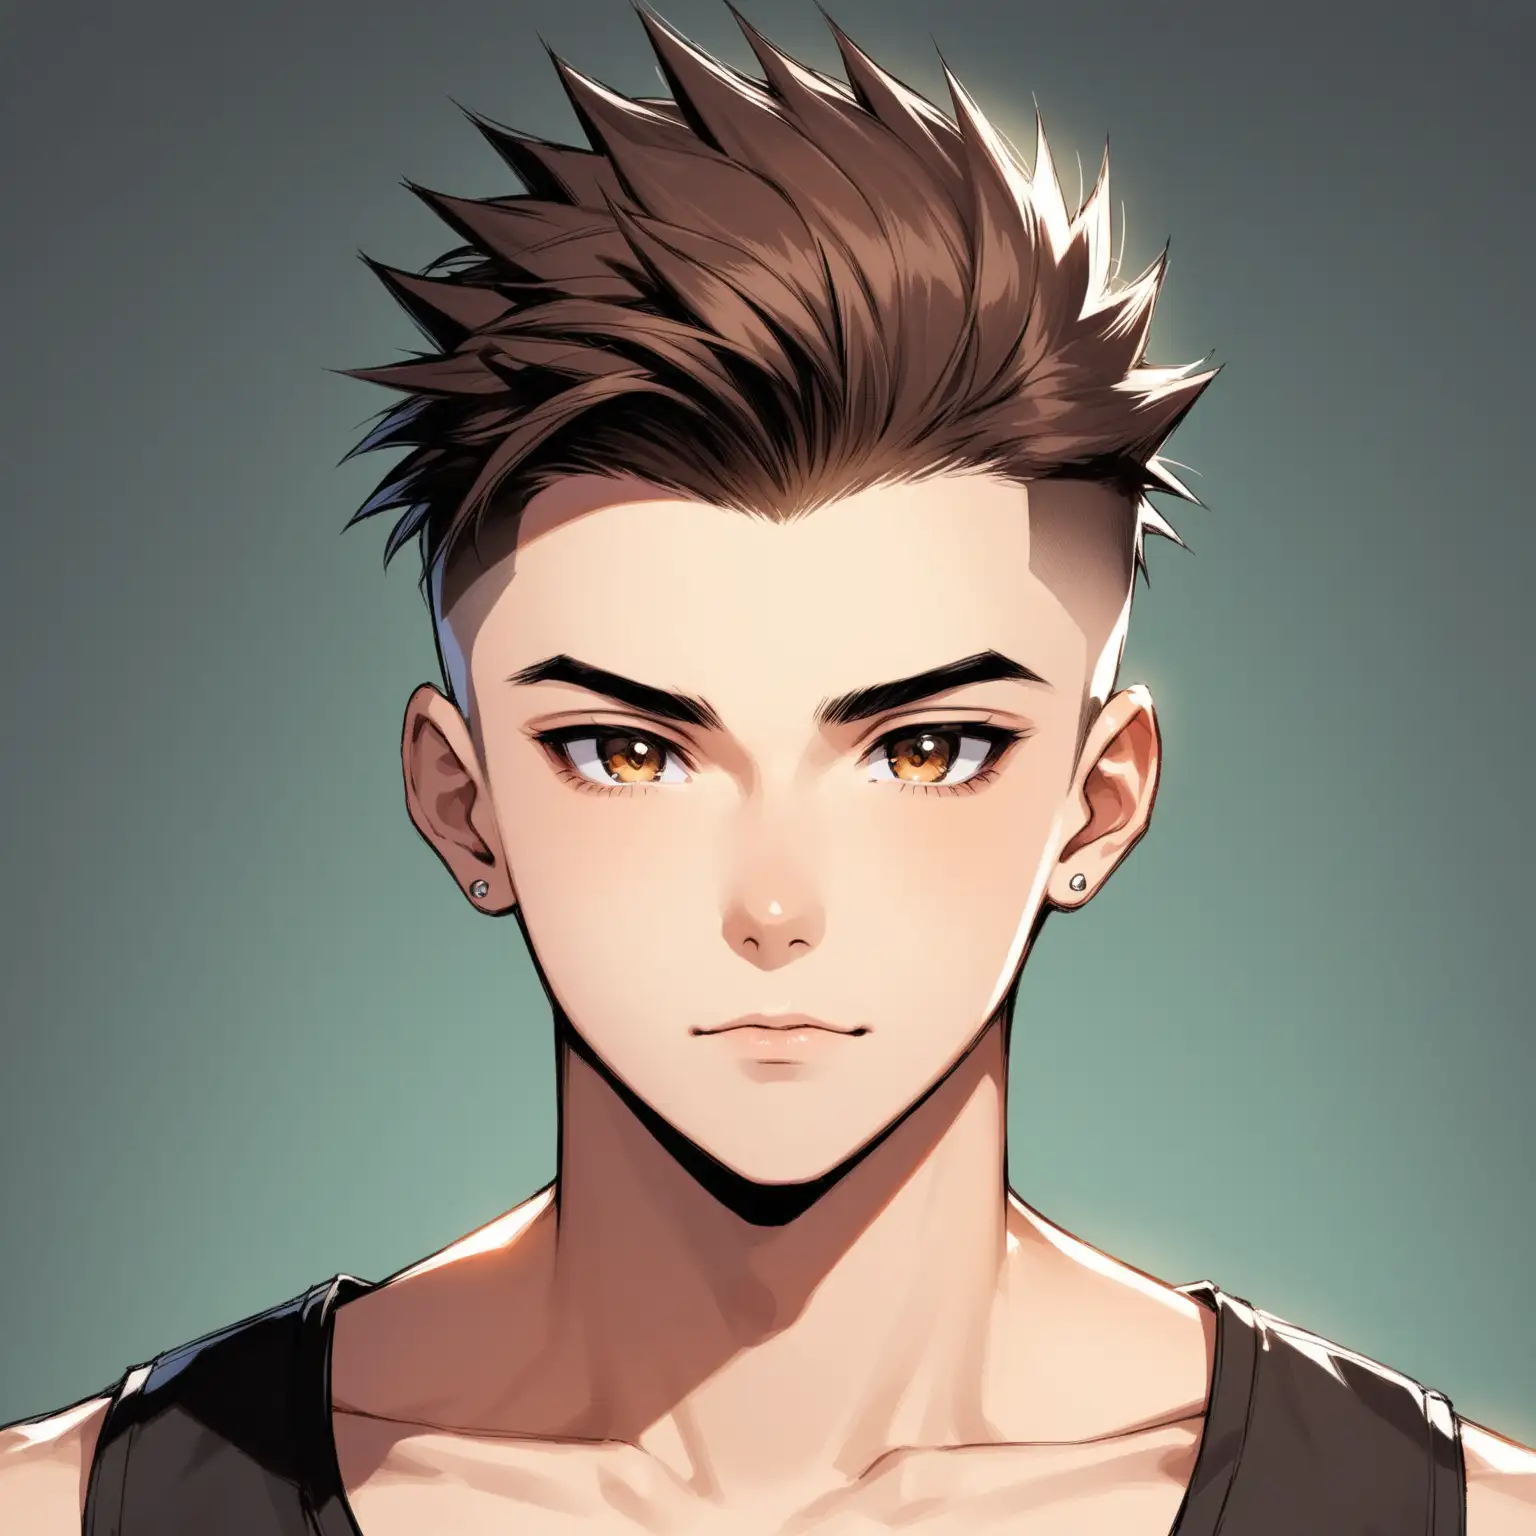 Handsome 18 year old with short spiked buzzed brown hair hair front view 